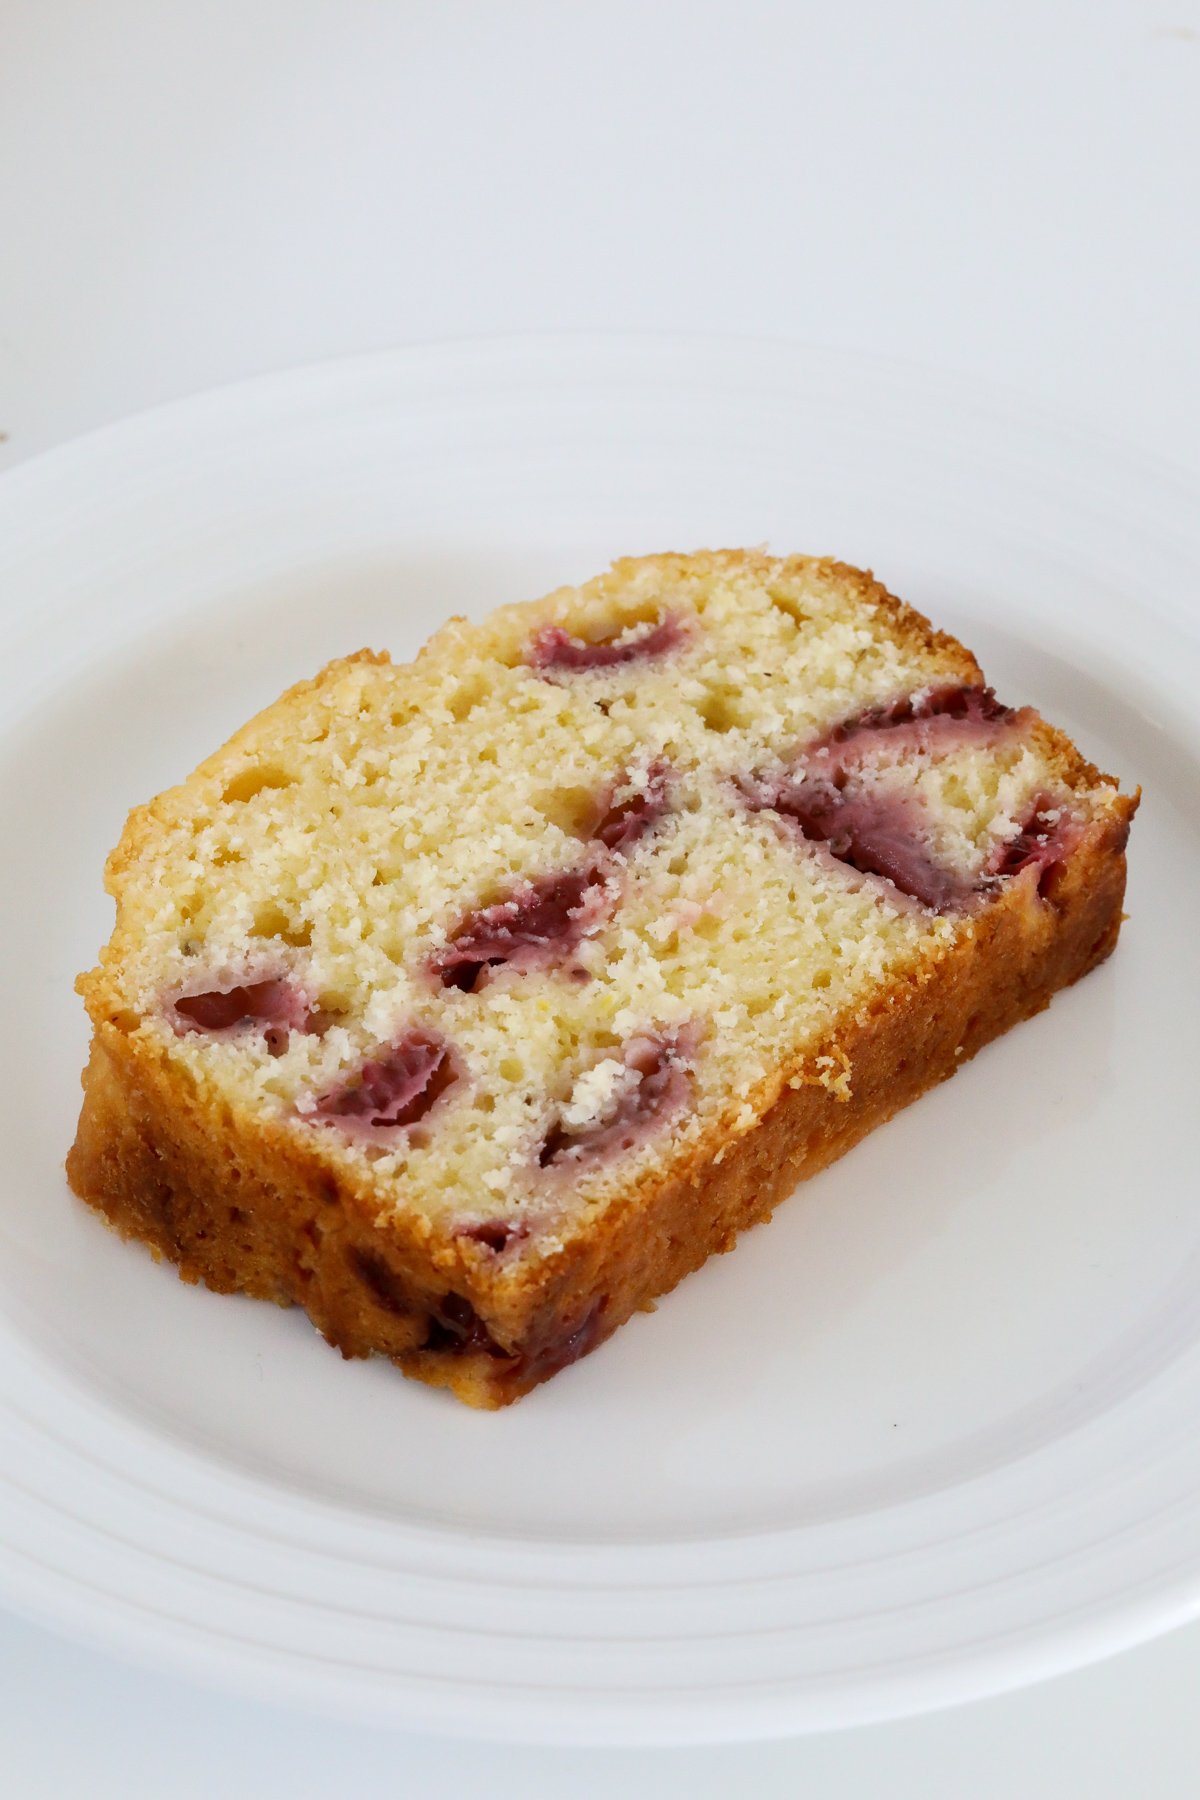 A slice of strawberry loaf on a white plate.